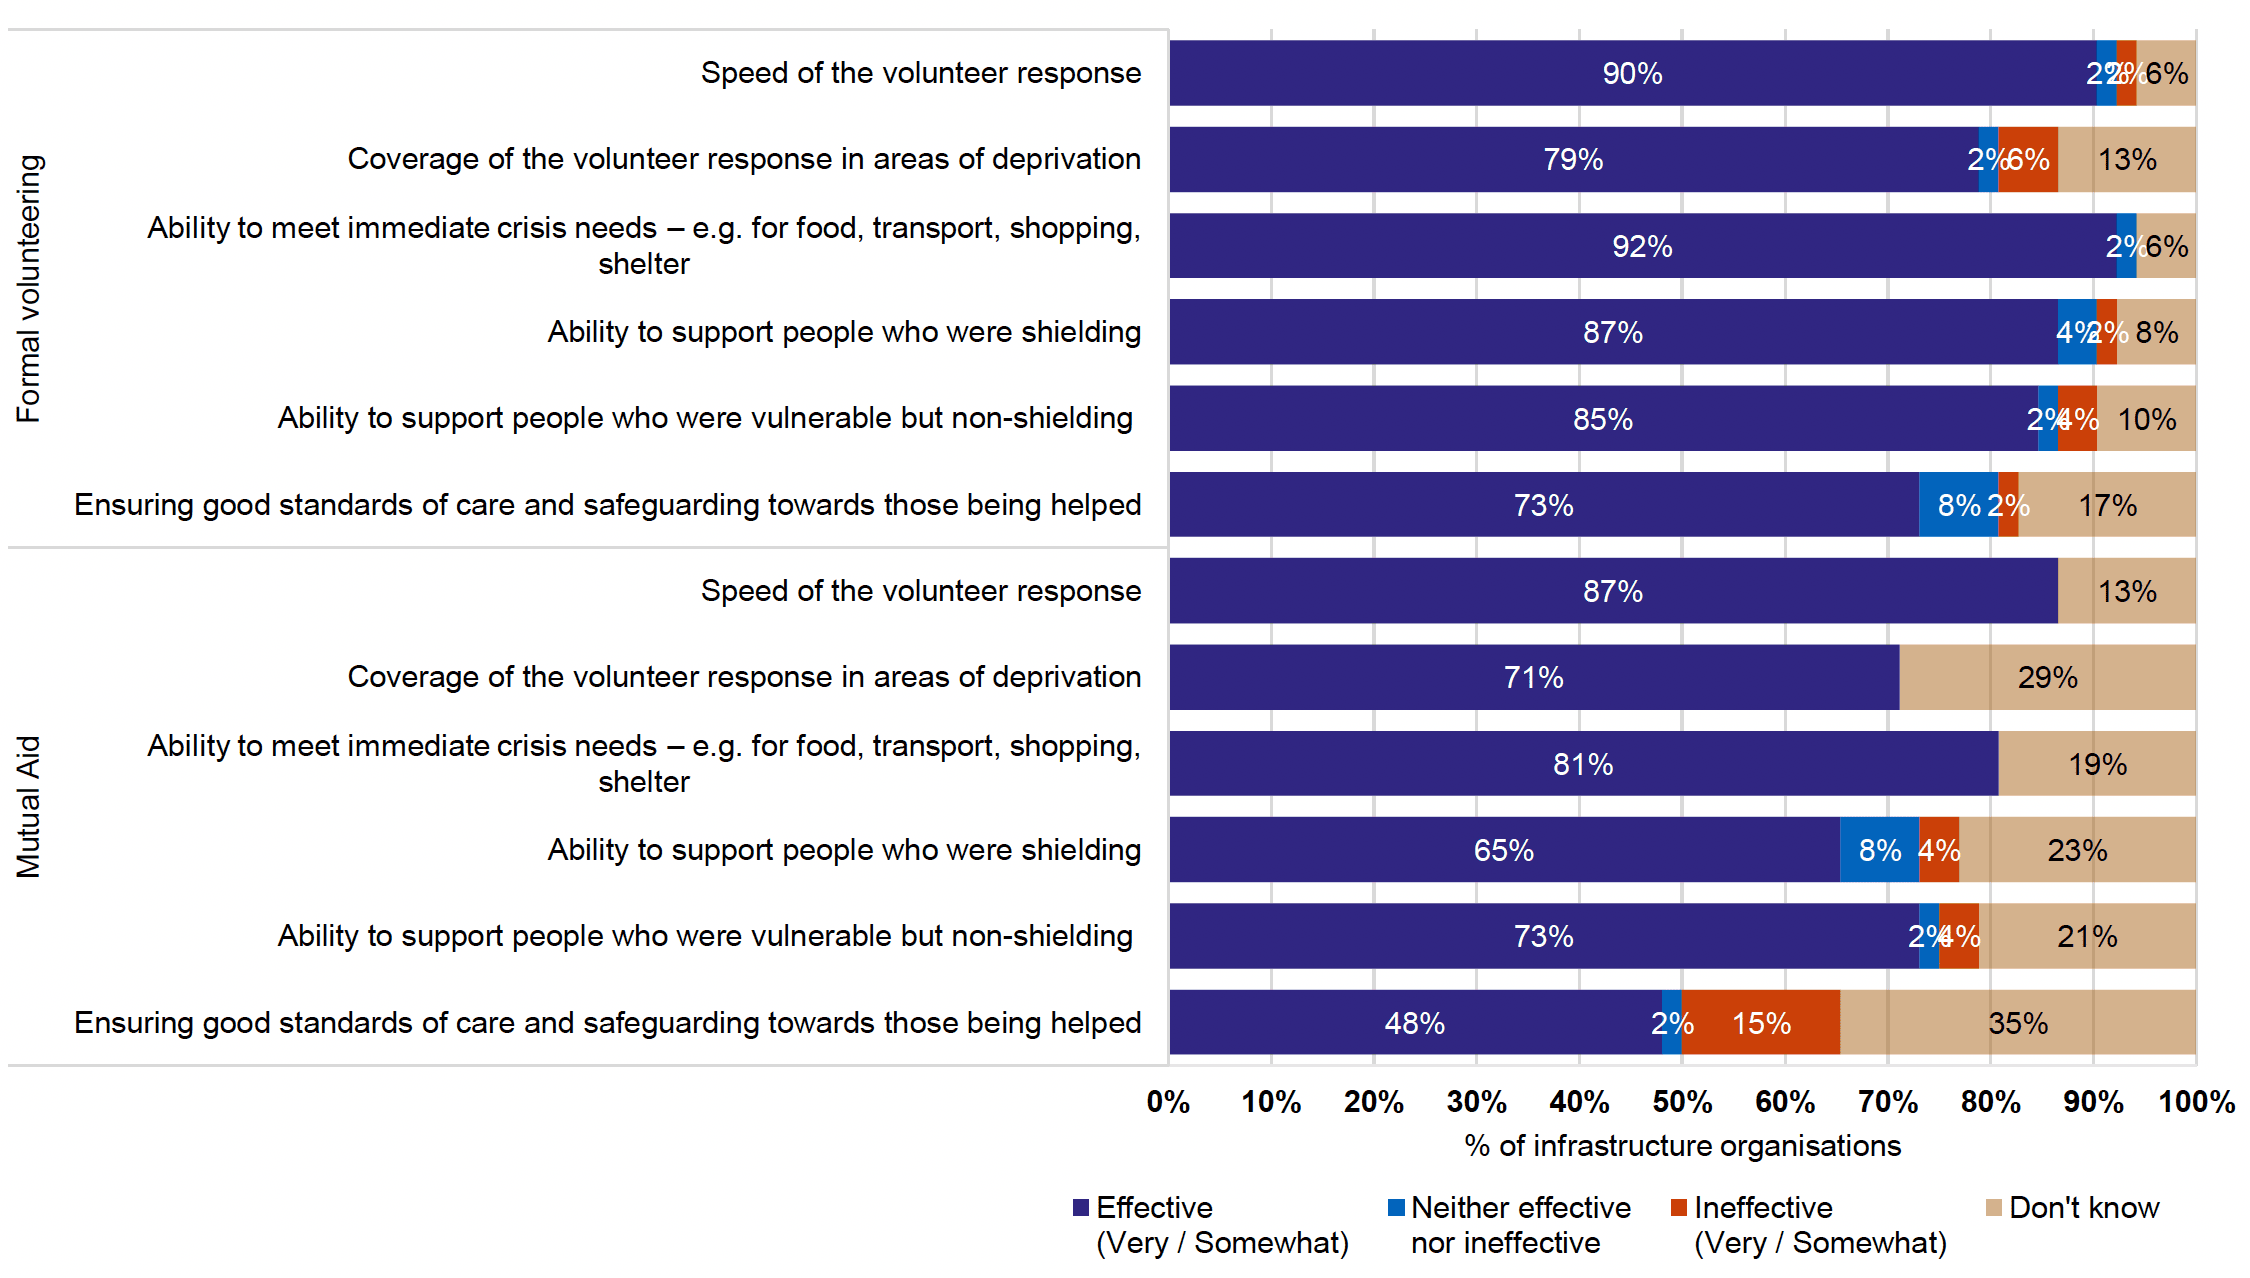 Chart showing infrastructure organisation views on the effectiveness of formal and mutual aid volunteering in the first lockdown (Mar-Jun 2020)